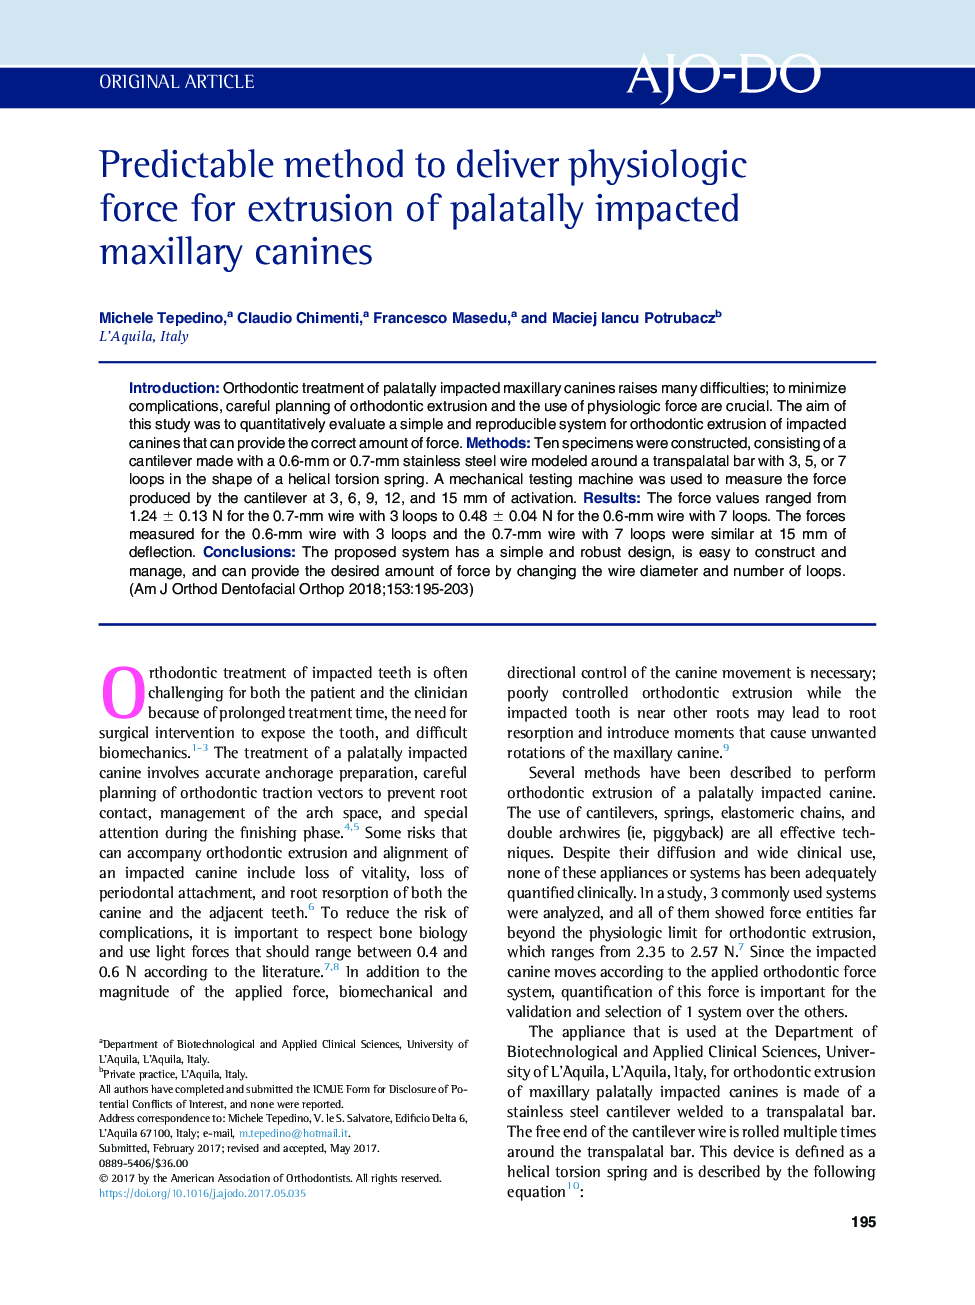 Predictable method to deliver physiologic force for extrusion of palatally impacted maxillary canines